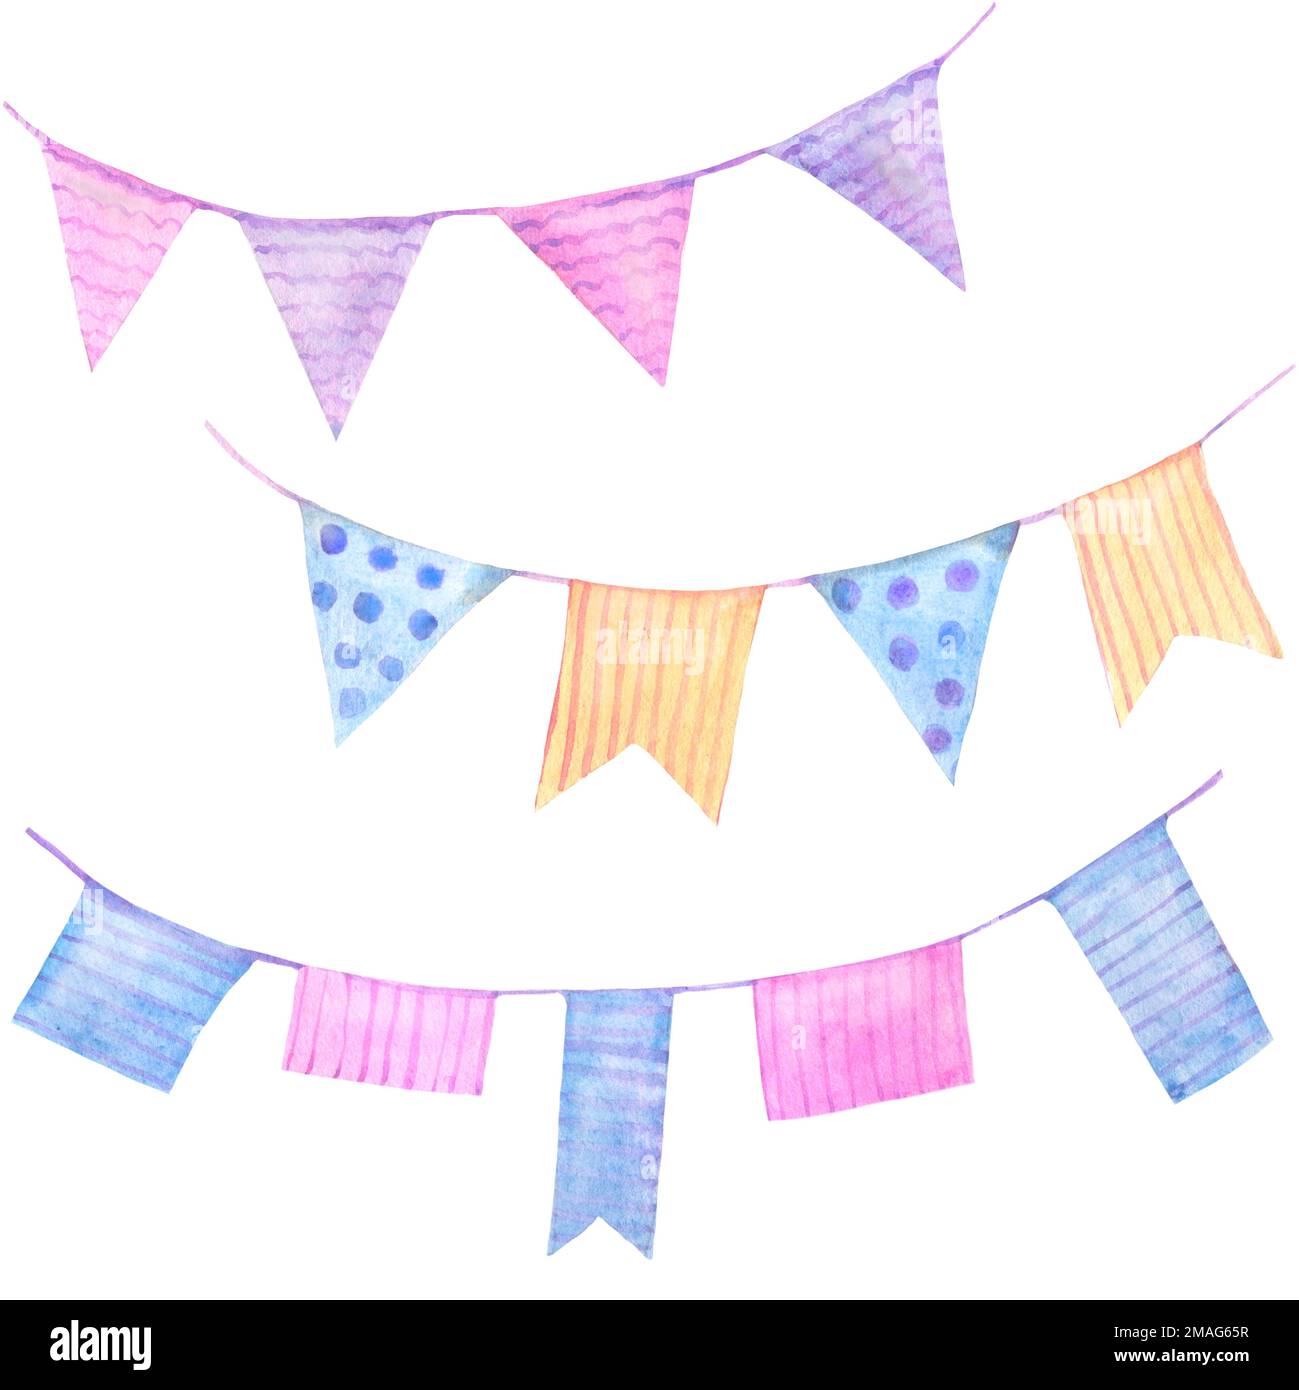 Festive garlands of colored flags. Watercolor illustration pastel colors for children's holiday. Cheerful birthday. Stock Photo